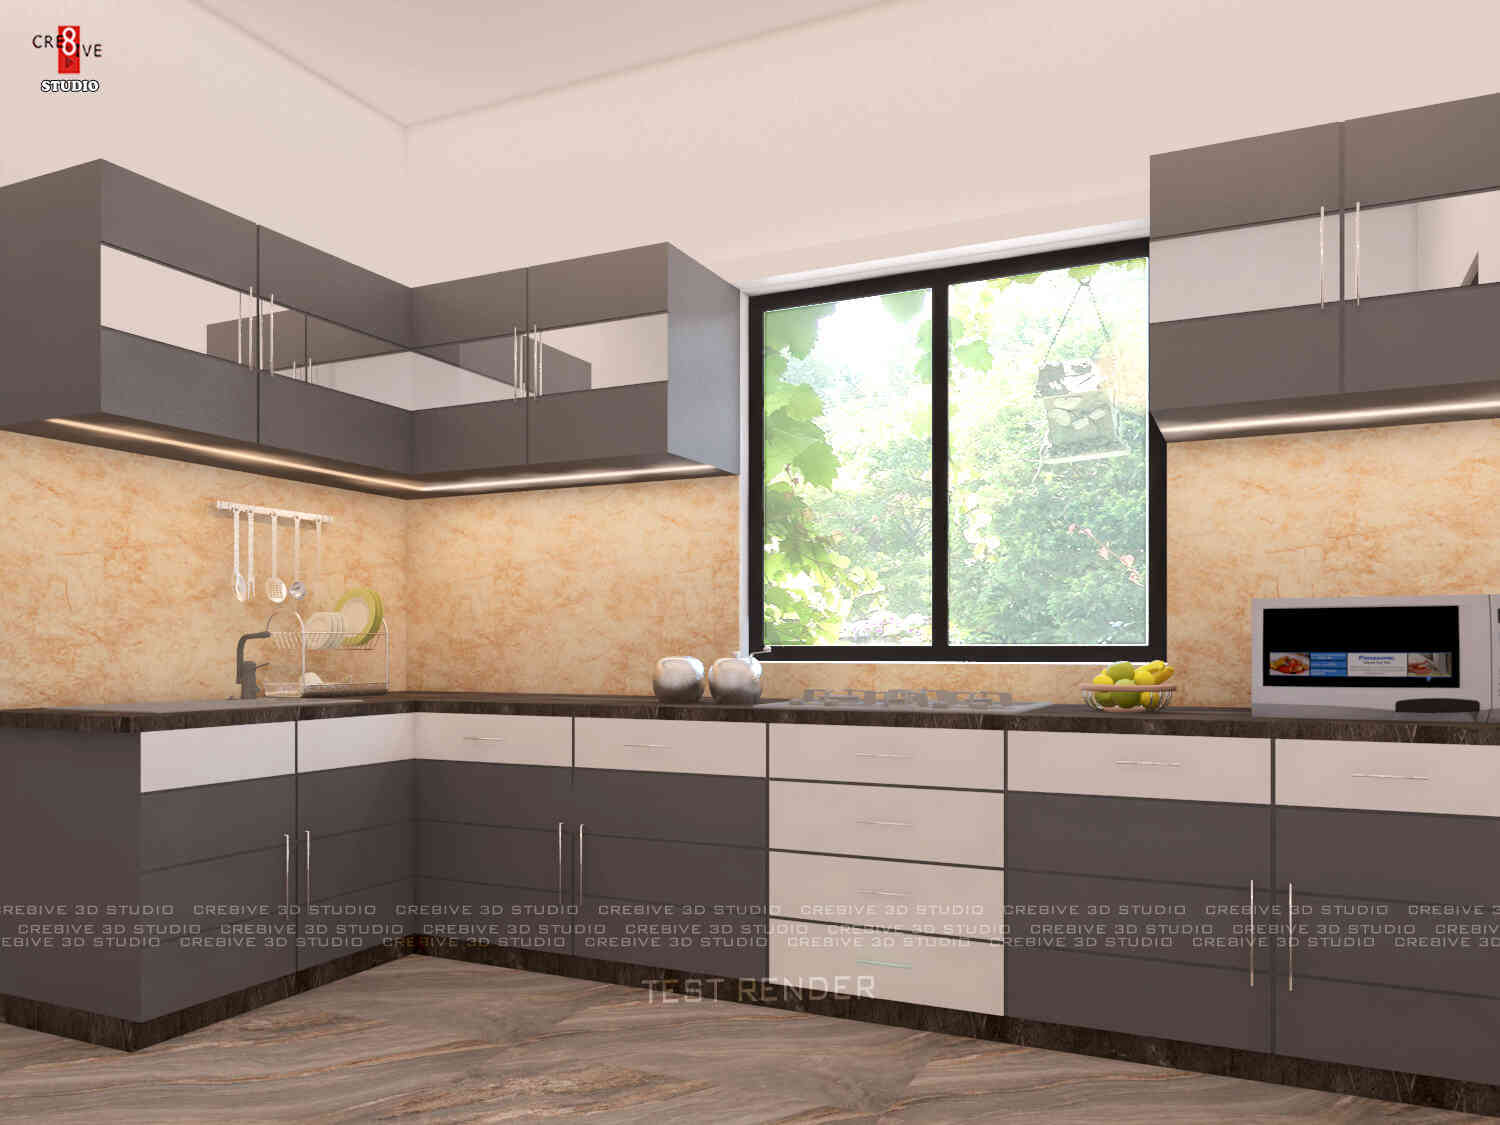 Modern Light Grey And White Modular L-Shaped Kitchen Design With Marble Wall